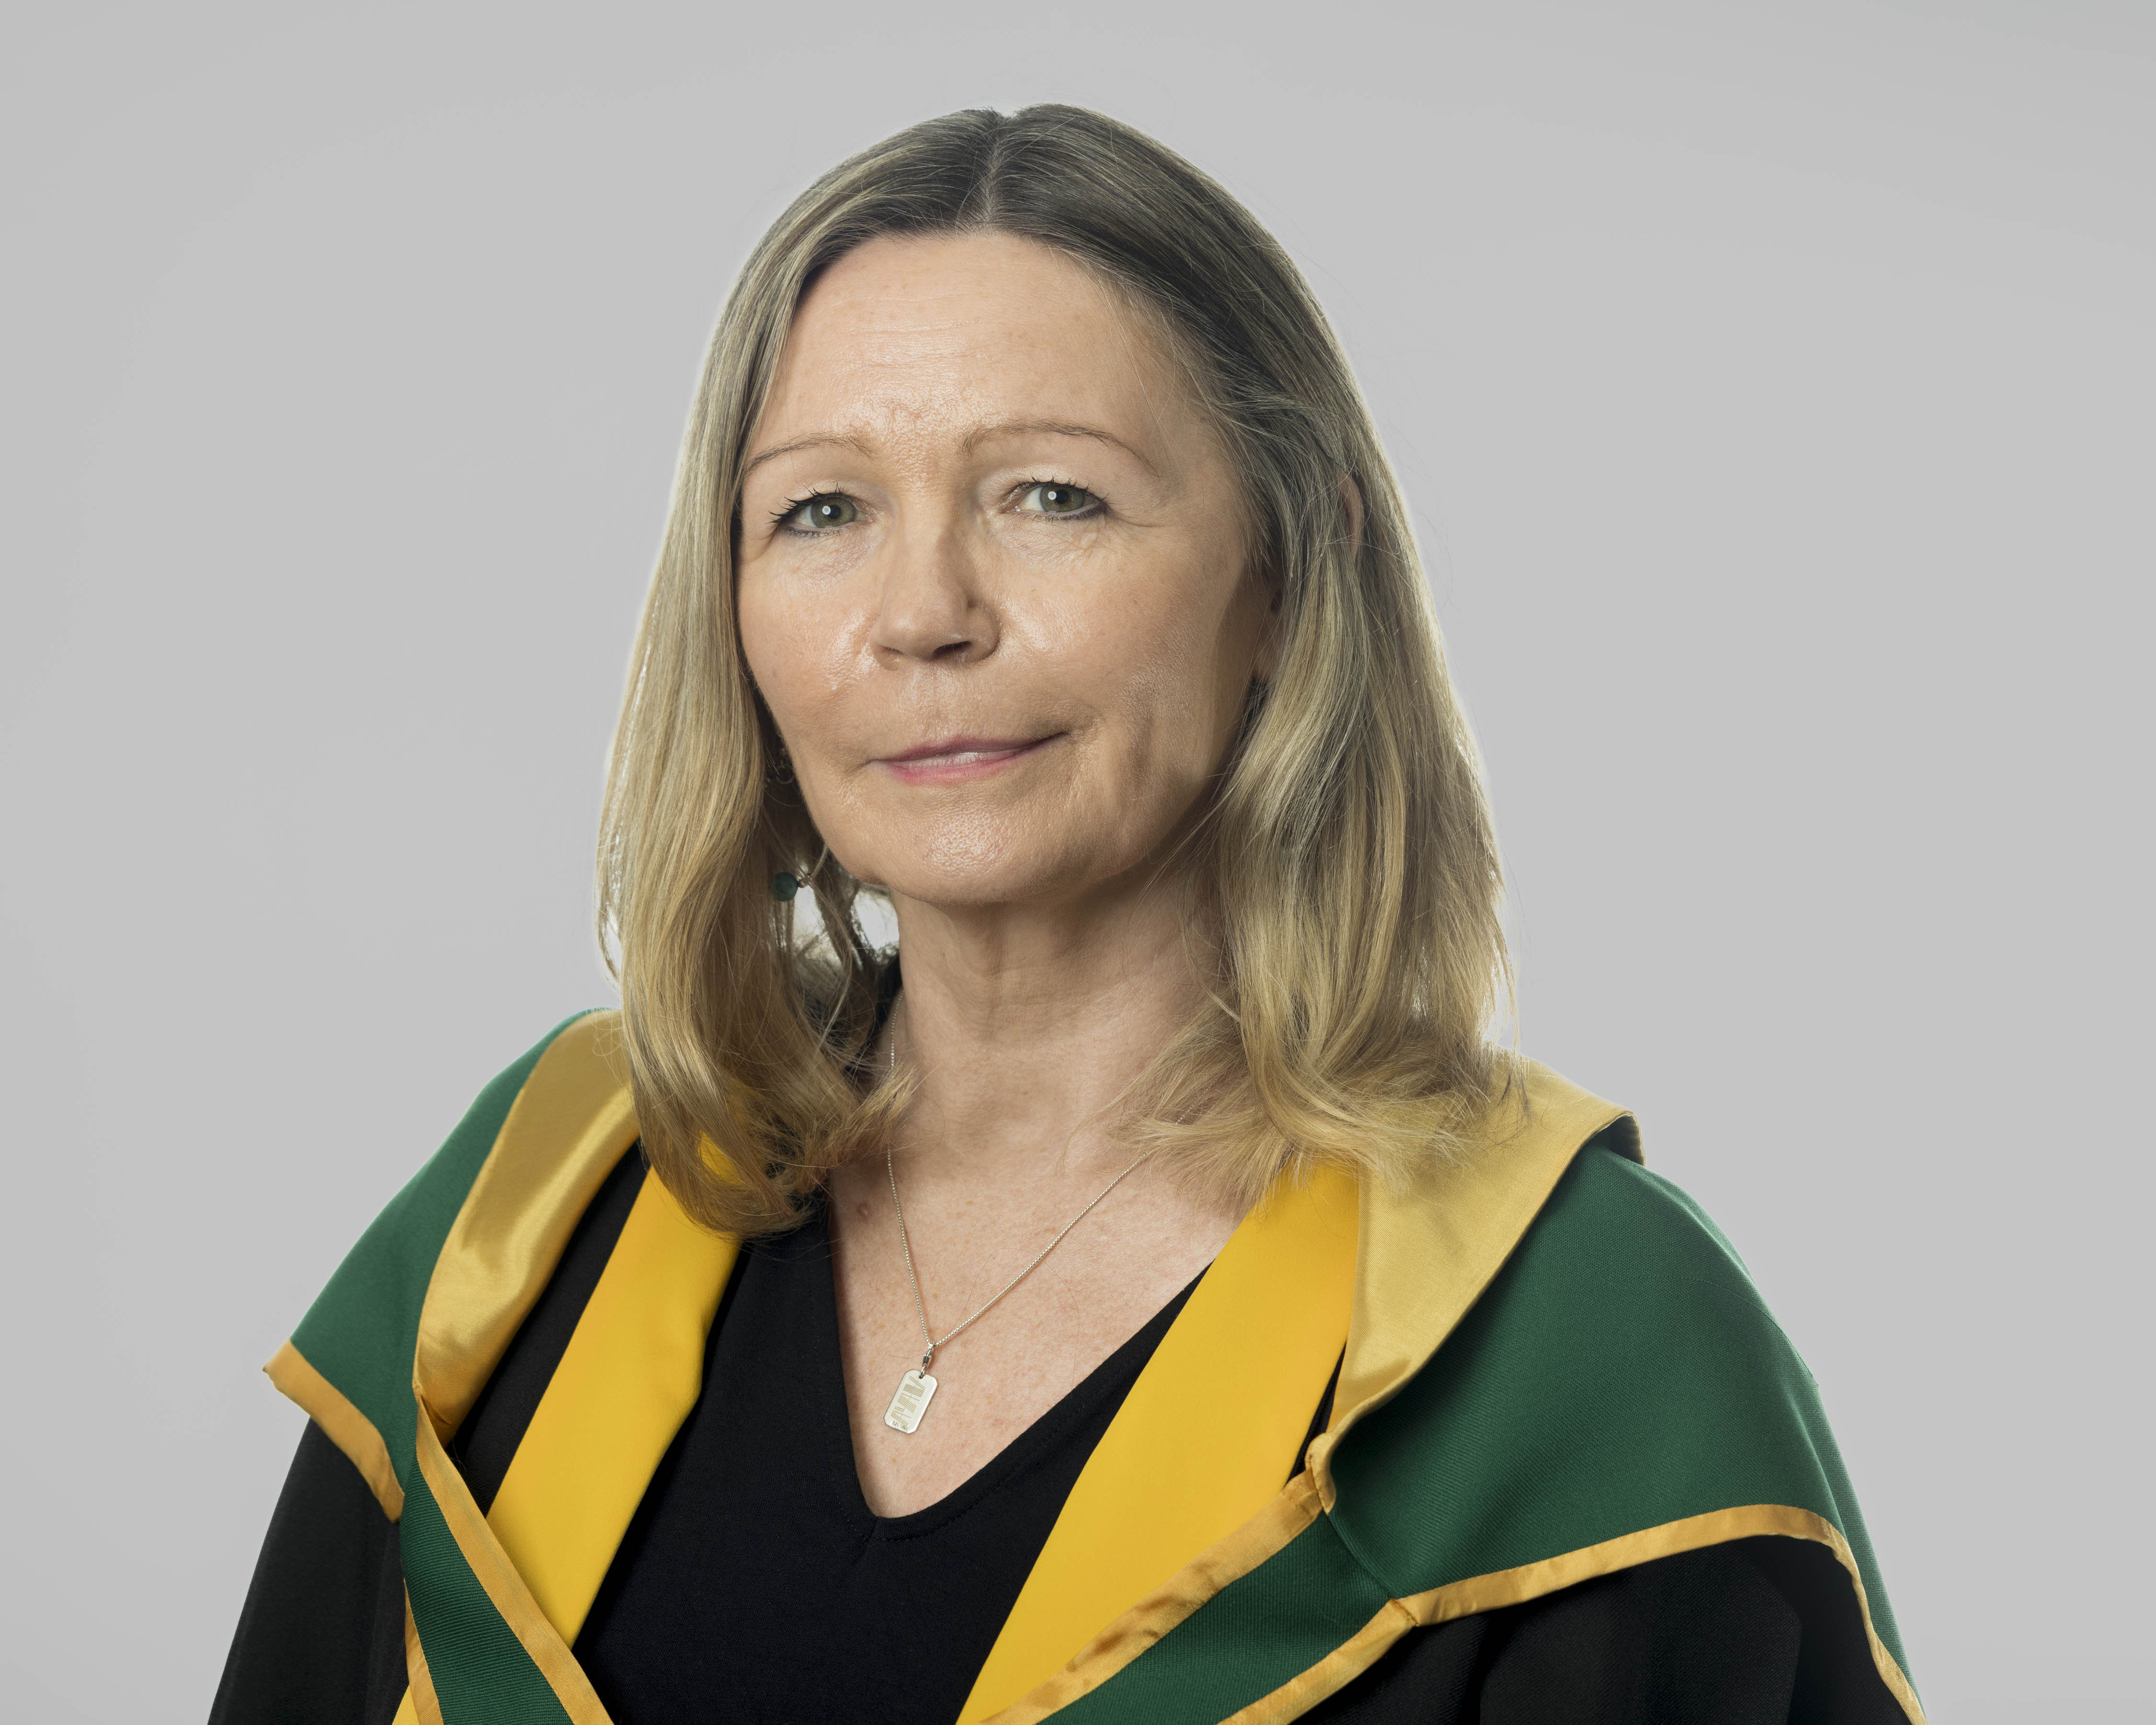 Professor Maggie O'Neill elected to the Royal Irish Academy